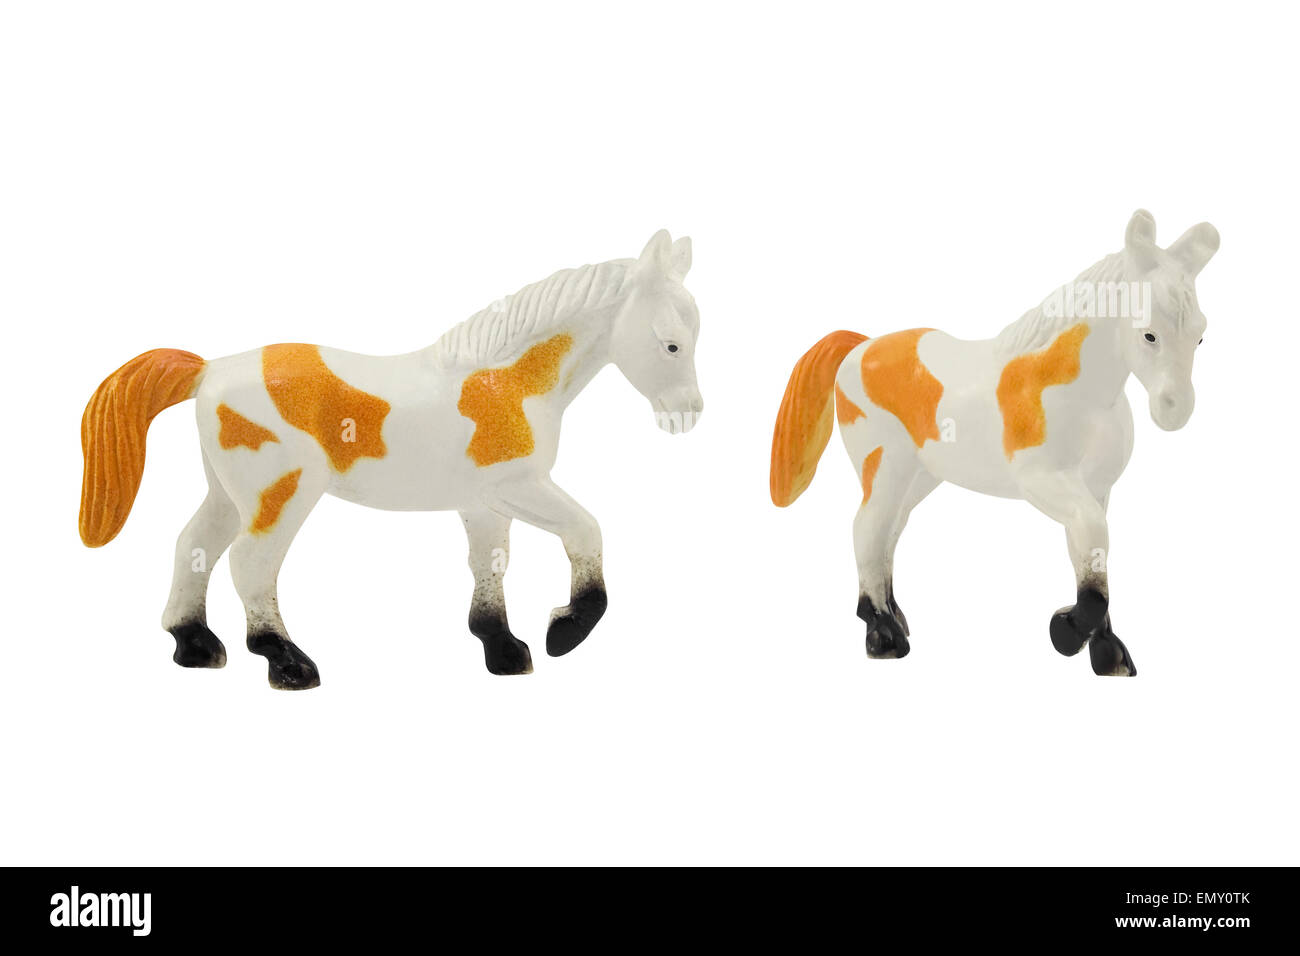 Isolated white horse toy with orange tail and spots different angles photo. Stock Photo